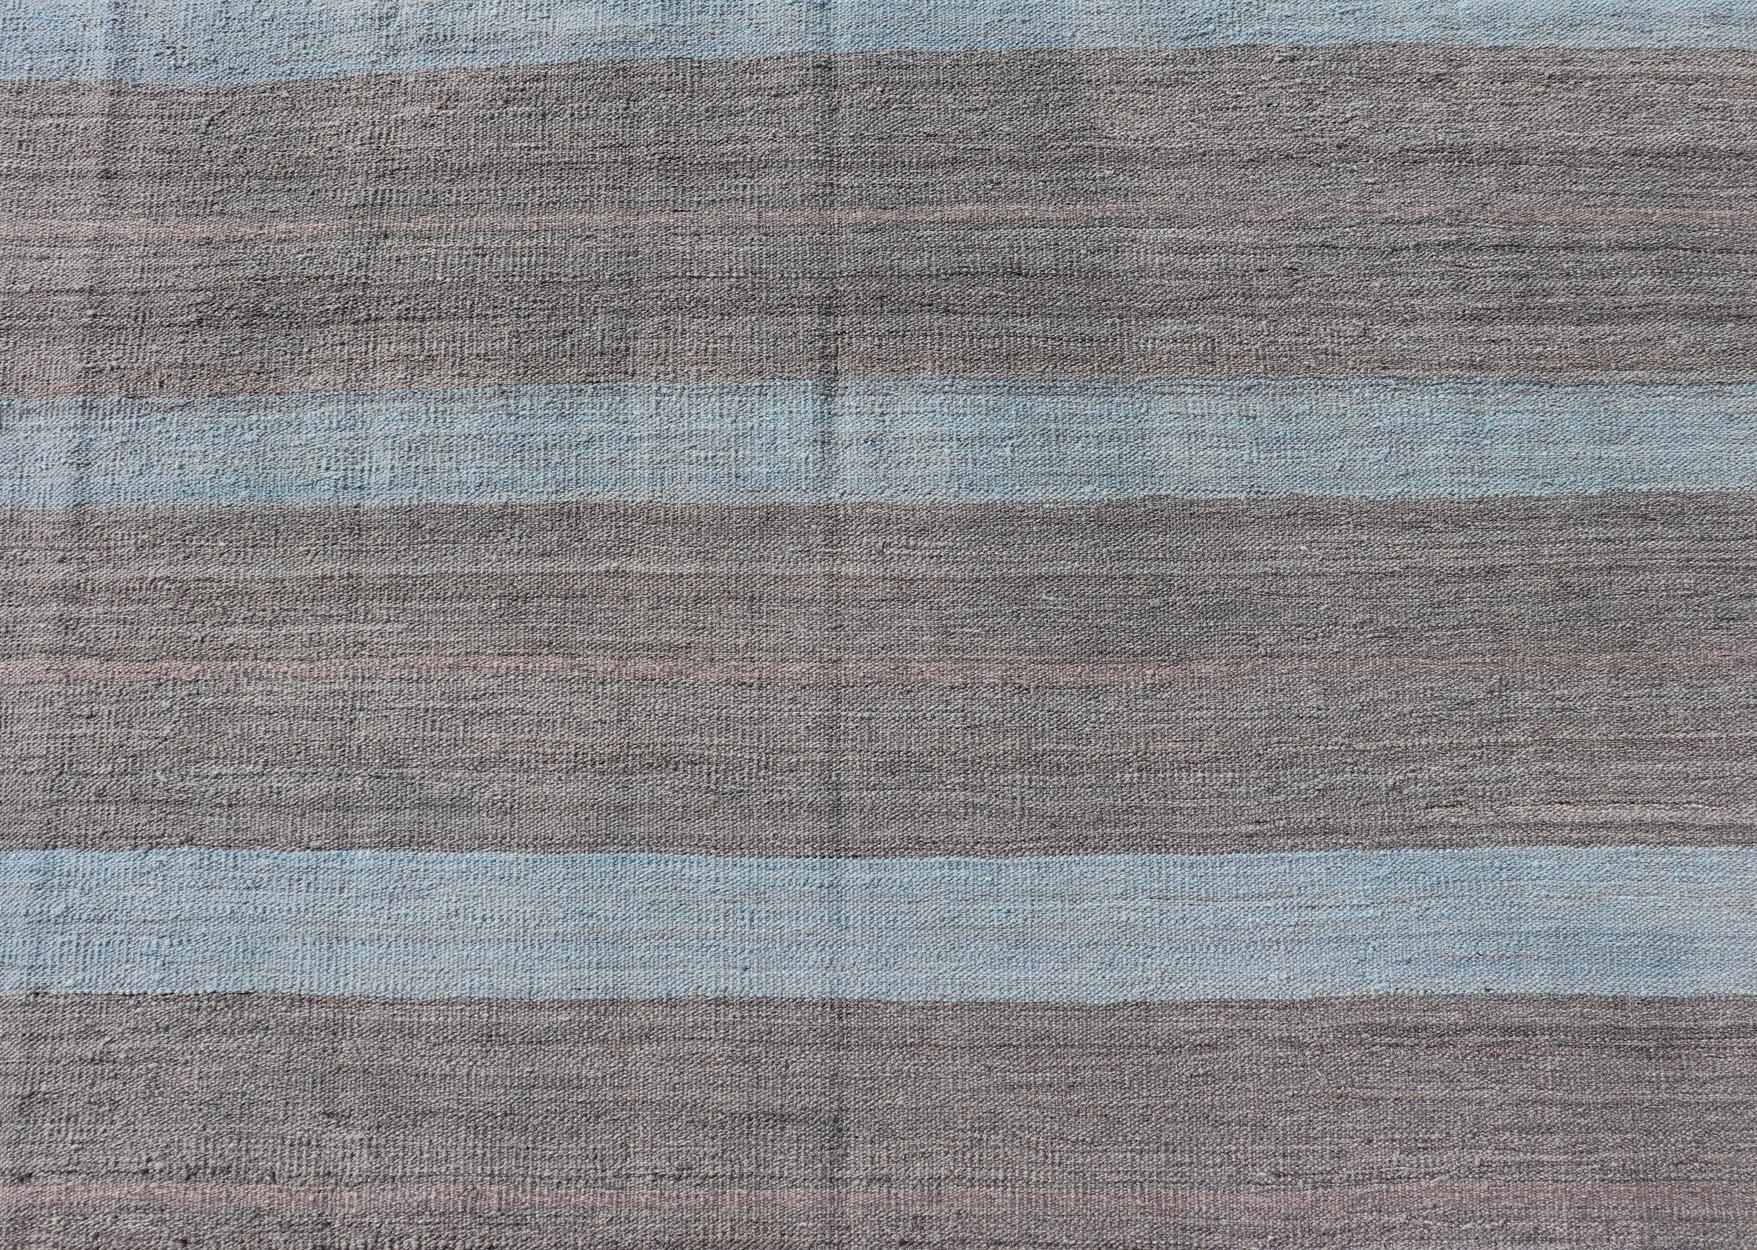 Wool Modern Kilim Casual Rug with Stripes in Shades of Blue, Gray' and Charcoal